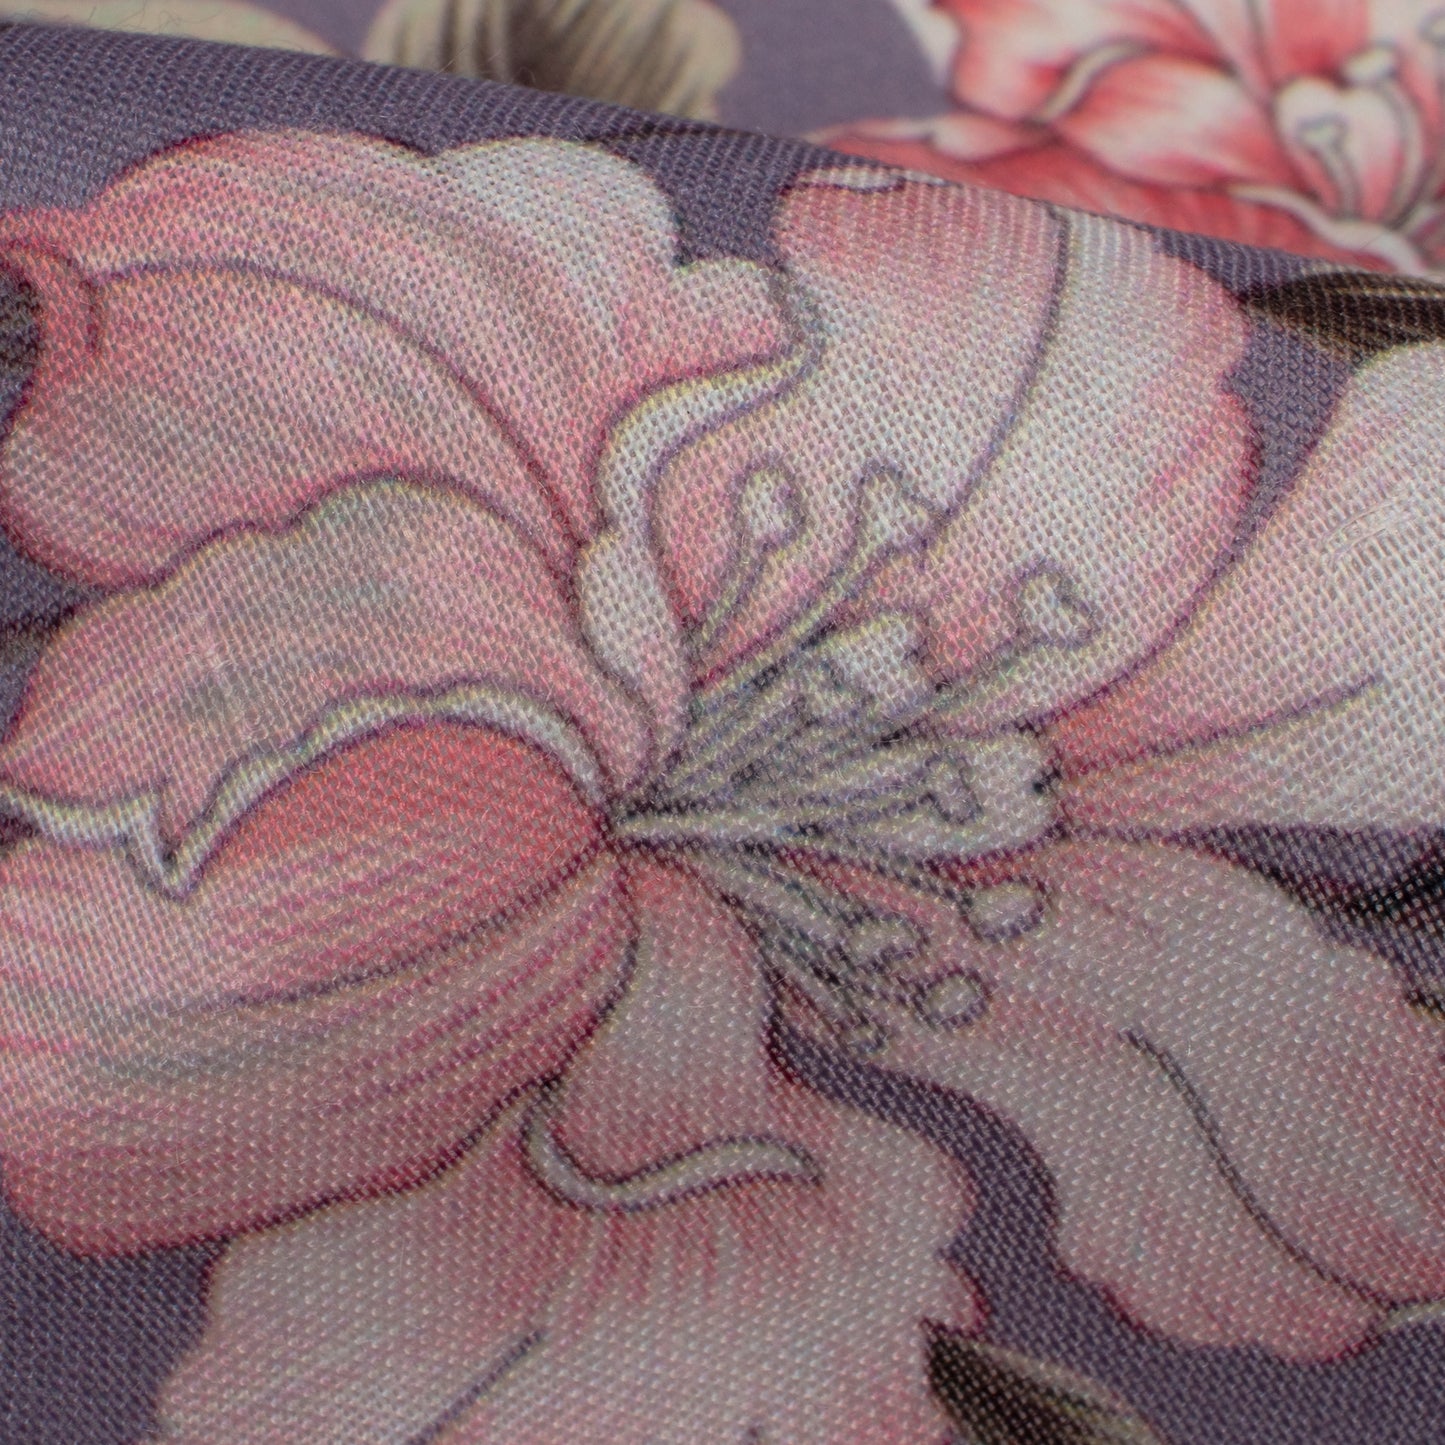 Solid Purple Floral Digital Print Poly Cambric Fabric